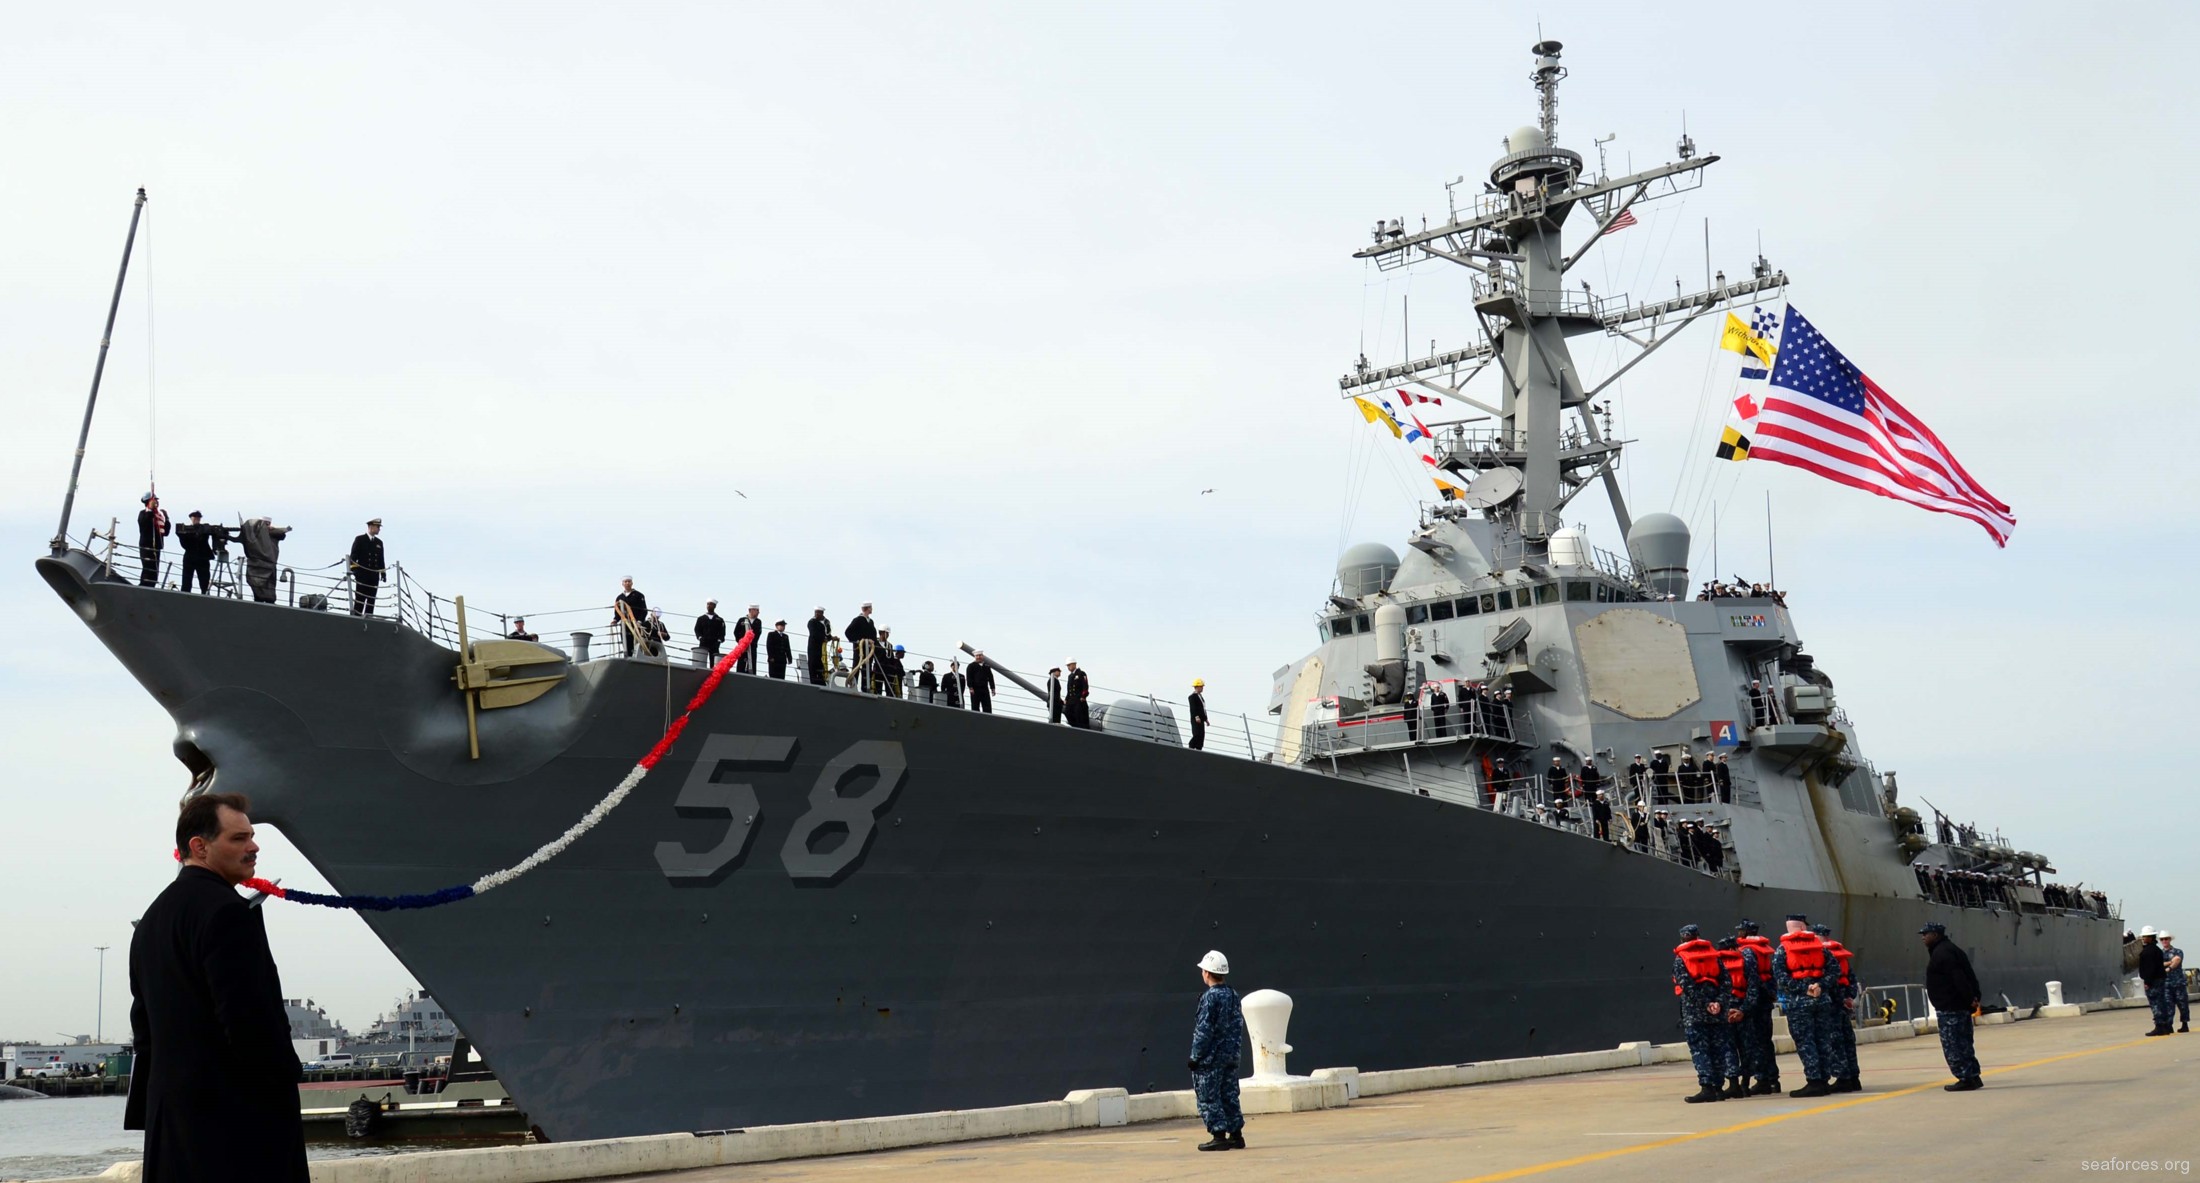 ddg-58 uss laboon guided missile destroyer us navy 42 arleigh burke class